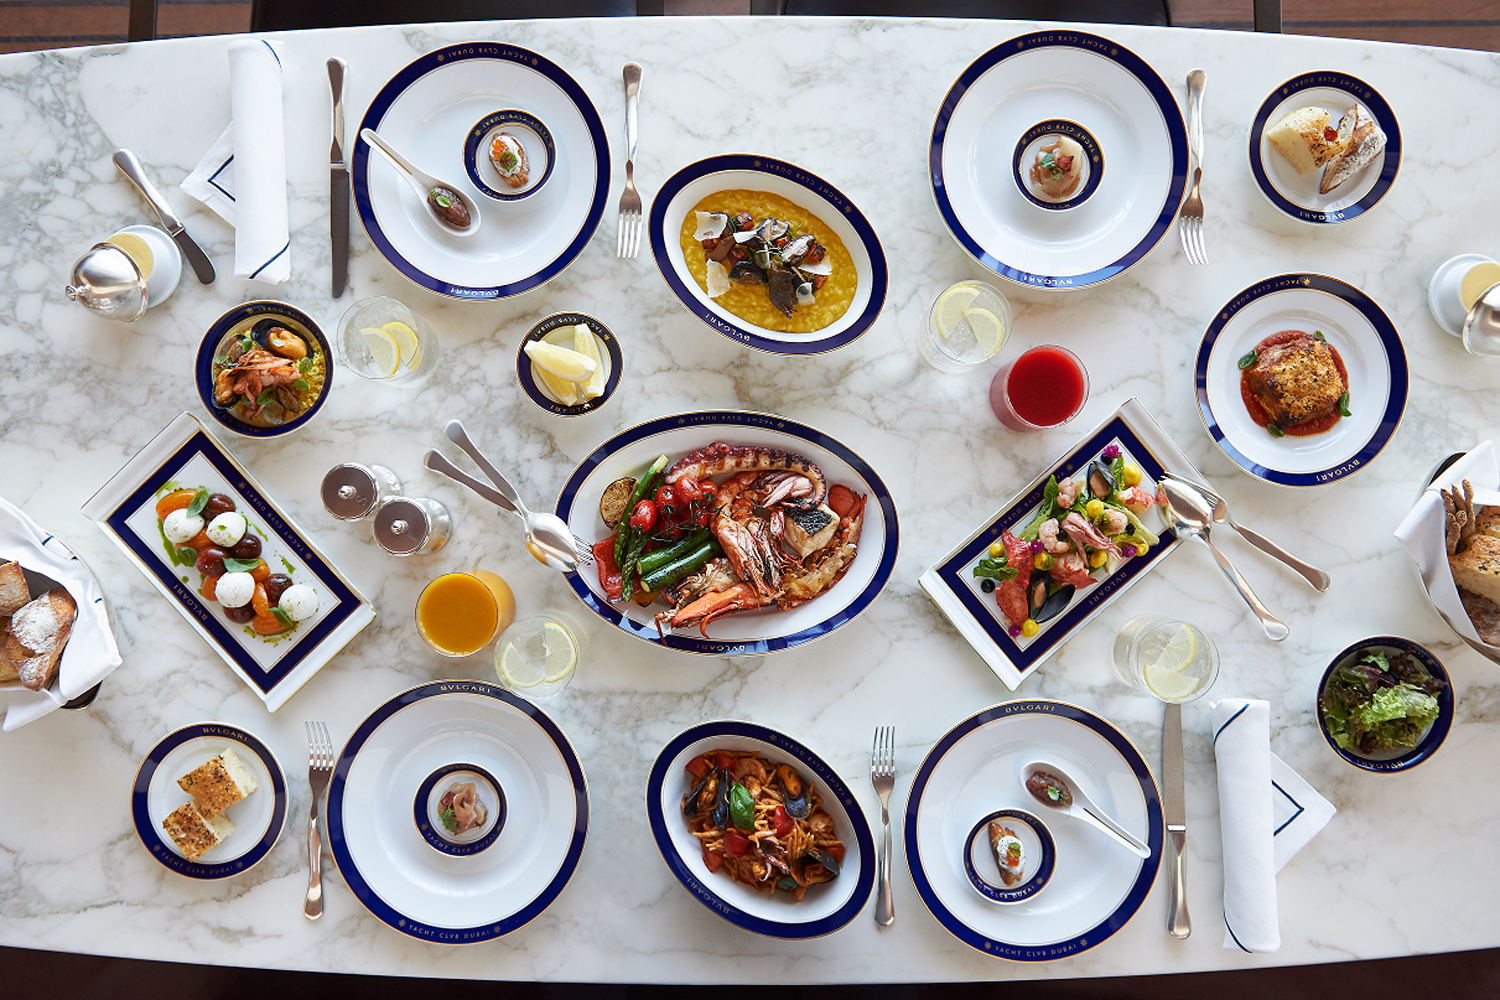 The Bvlgari Yacht Club restaurant has launched a new family-friendly brunch  | Time Out Dubai